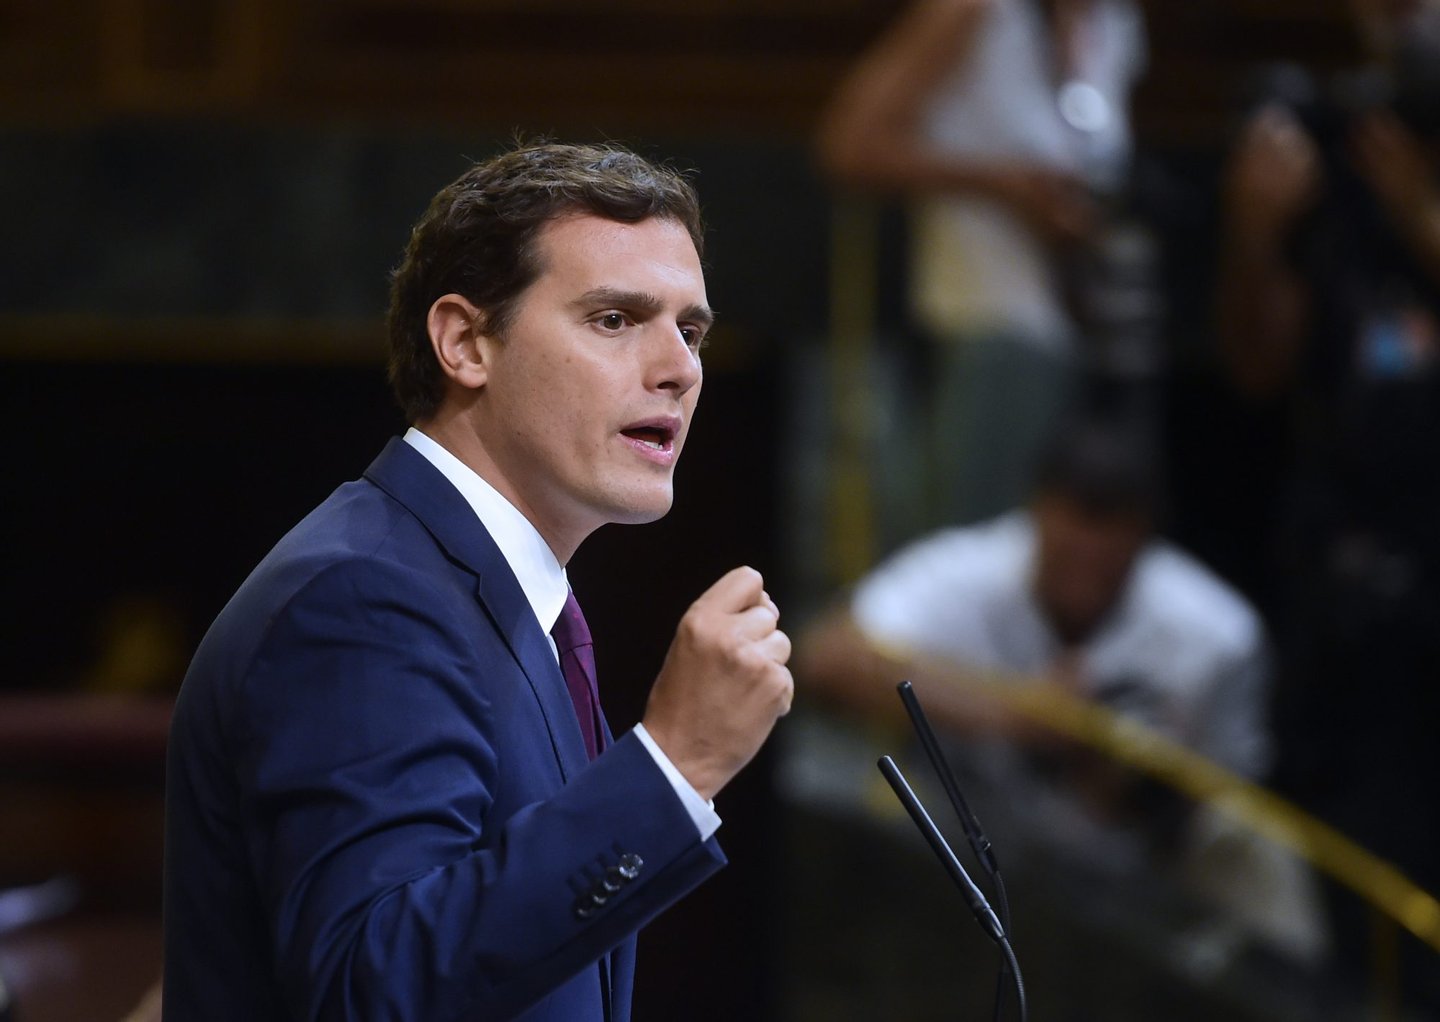 Leader of center-right party Ciudadanos, Albert Rivera speaks in the Spanish Congress (Las Cortes) on August 31, 2016, in Madrid during the second day of a parliamentary investiture debate to vote through a prime minister and allow the country to finally get a government. Spain's caretaker Prime Minister Mariano Rajoy on Tuesday urged lawmakers to back him for a second term, arguing ahead of a confidence vote which he appears set to lose that the country "urgently" needs a government.  / AFP / PIERRE-PHILIPPE MARCOU        (Photo credit should read PIERRE-PHILIPPE MARCOU/AFP/Getty Images)